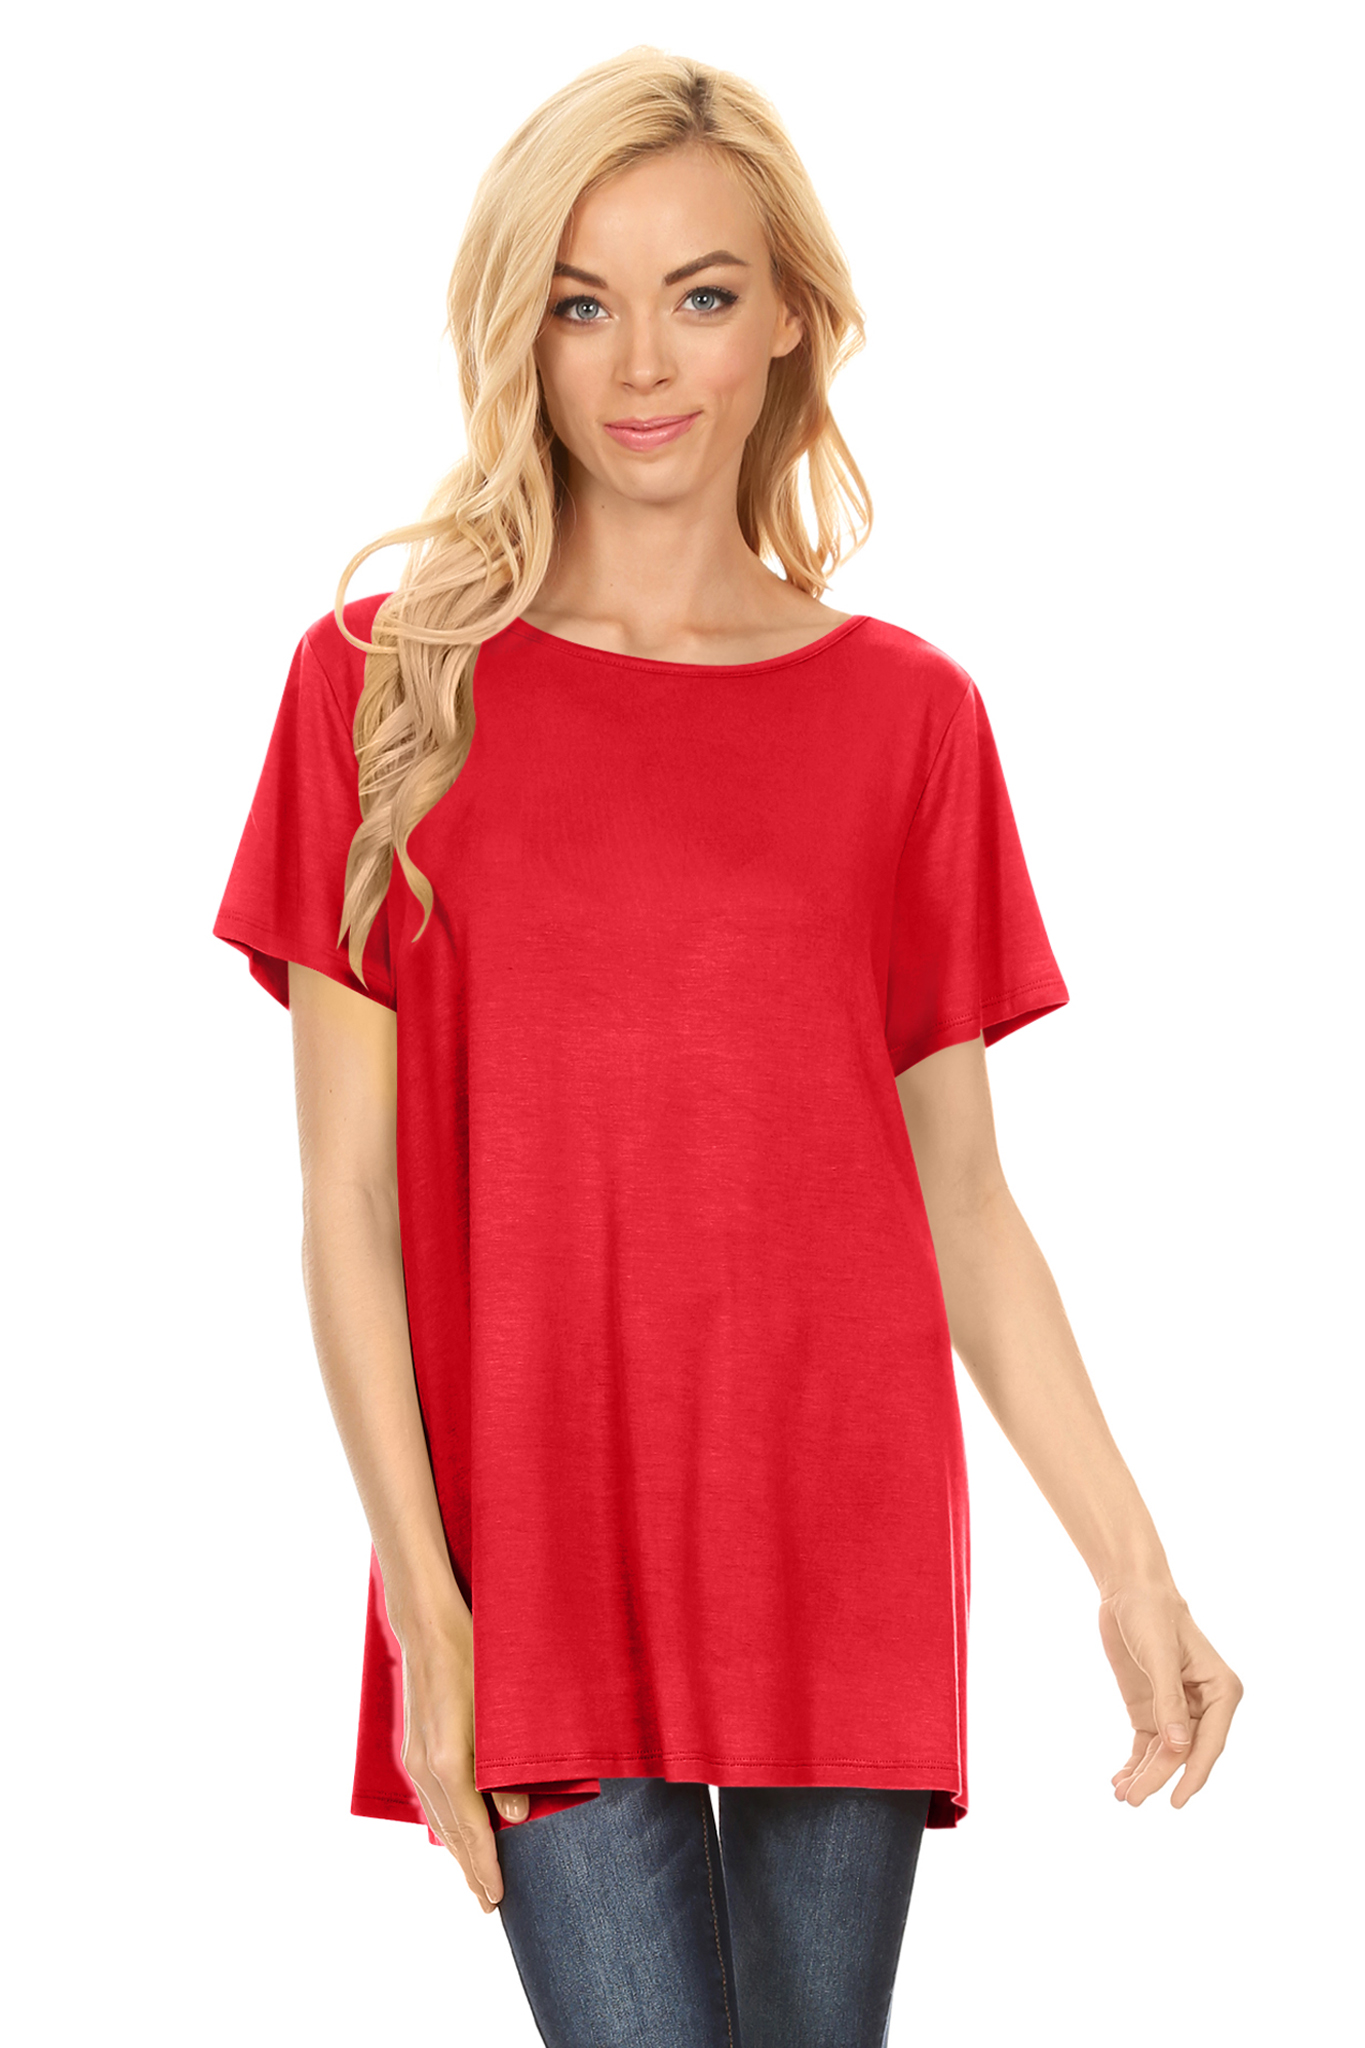 Short Sleeve Flowy Tunic Tops for Women a Line Flared Loose Fit Swing